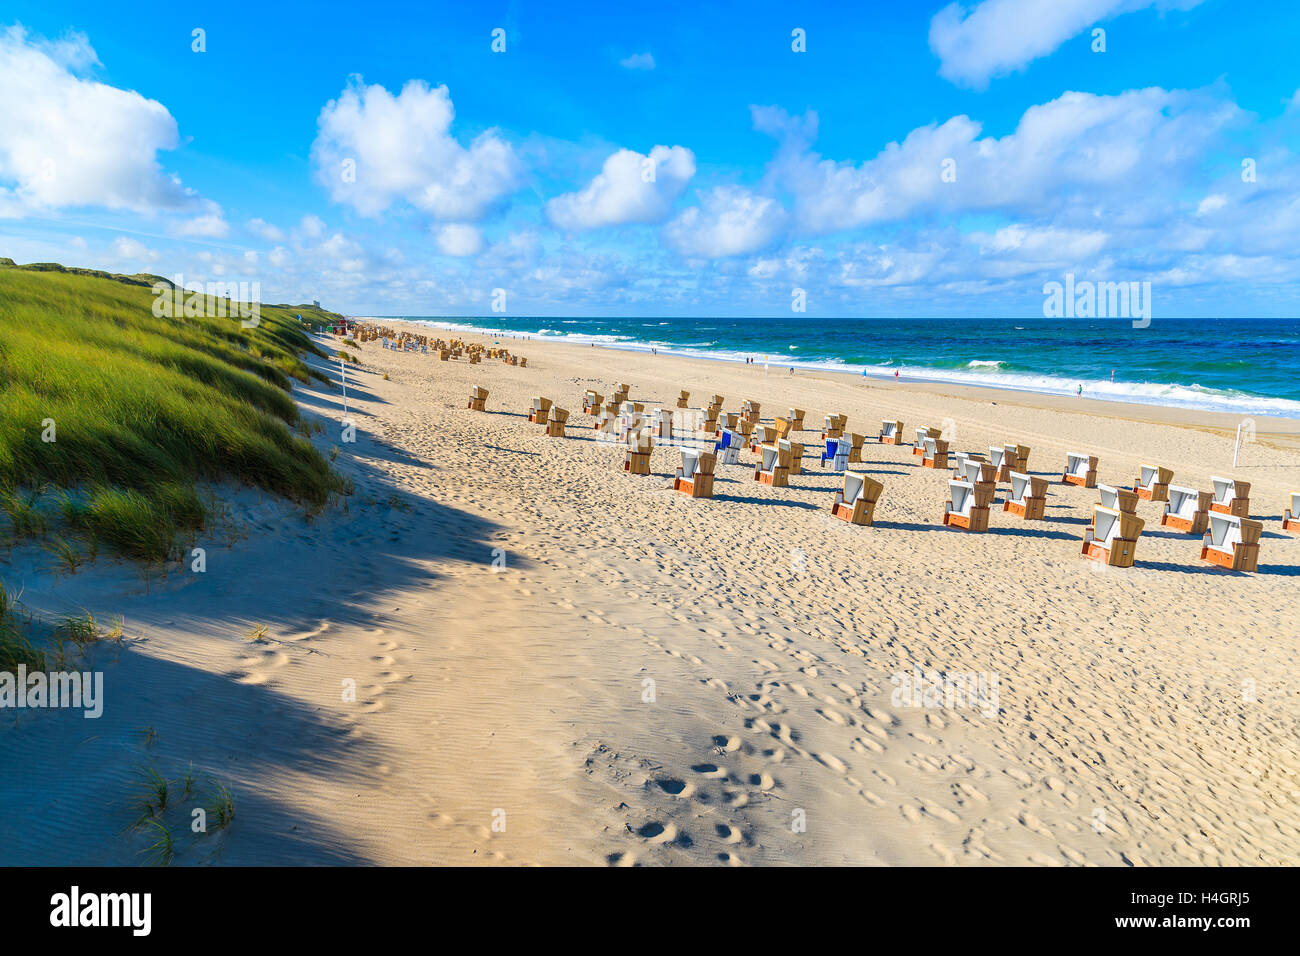 Chairs on sandy beach in Wenningsted town, Sylt island, Germany Stock Photo